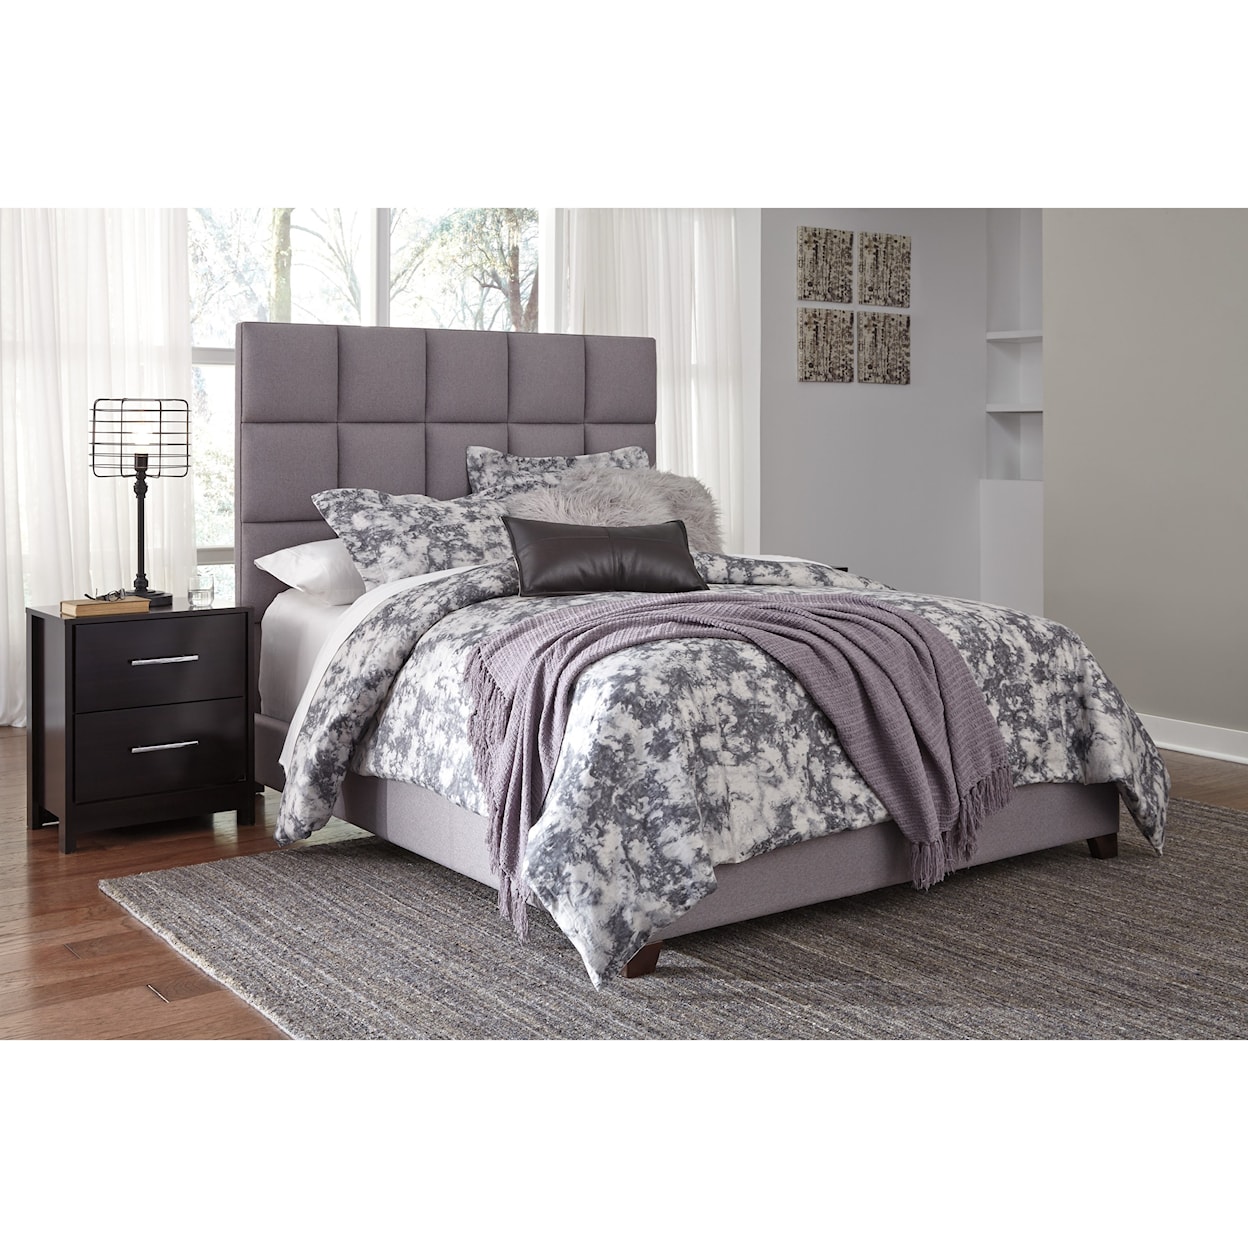 Ashley Dolante Dolante Queen Upholstered Bed